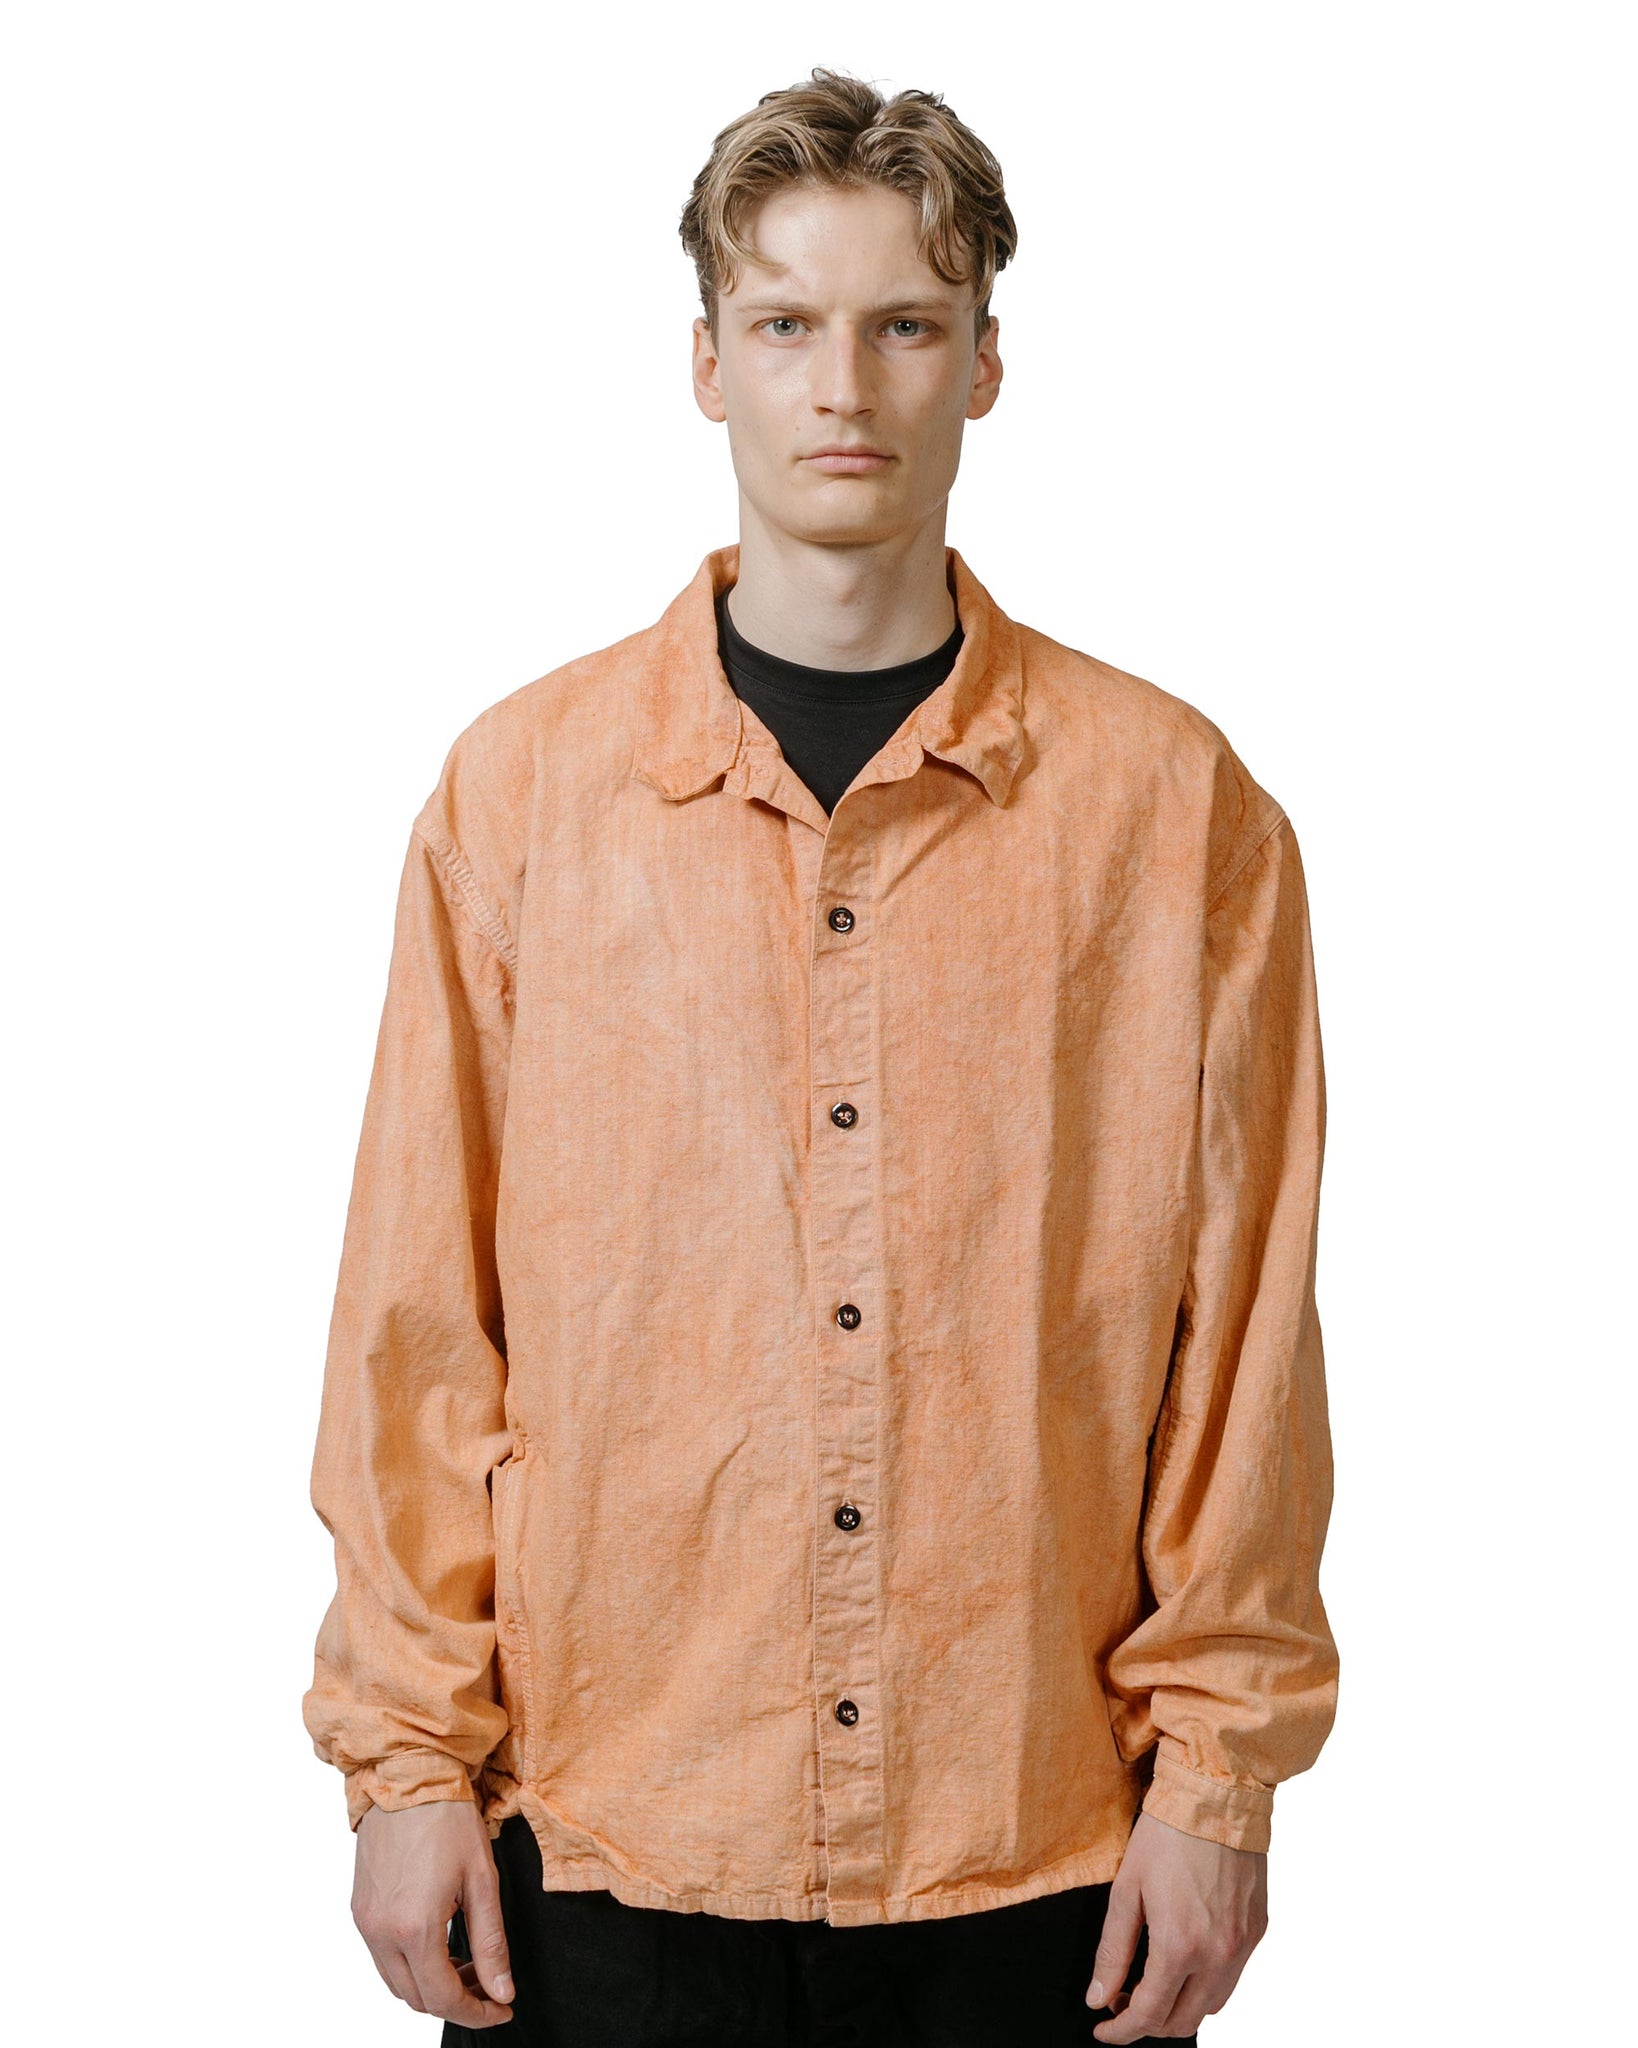 Tender Type 453 Double Cuff Mandolin Pocket Shirt Bleached Weft Stripe Cotton Canvas Red Ochre model front